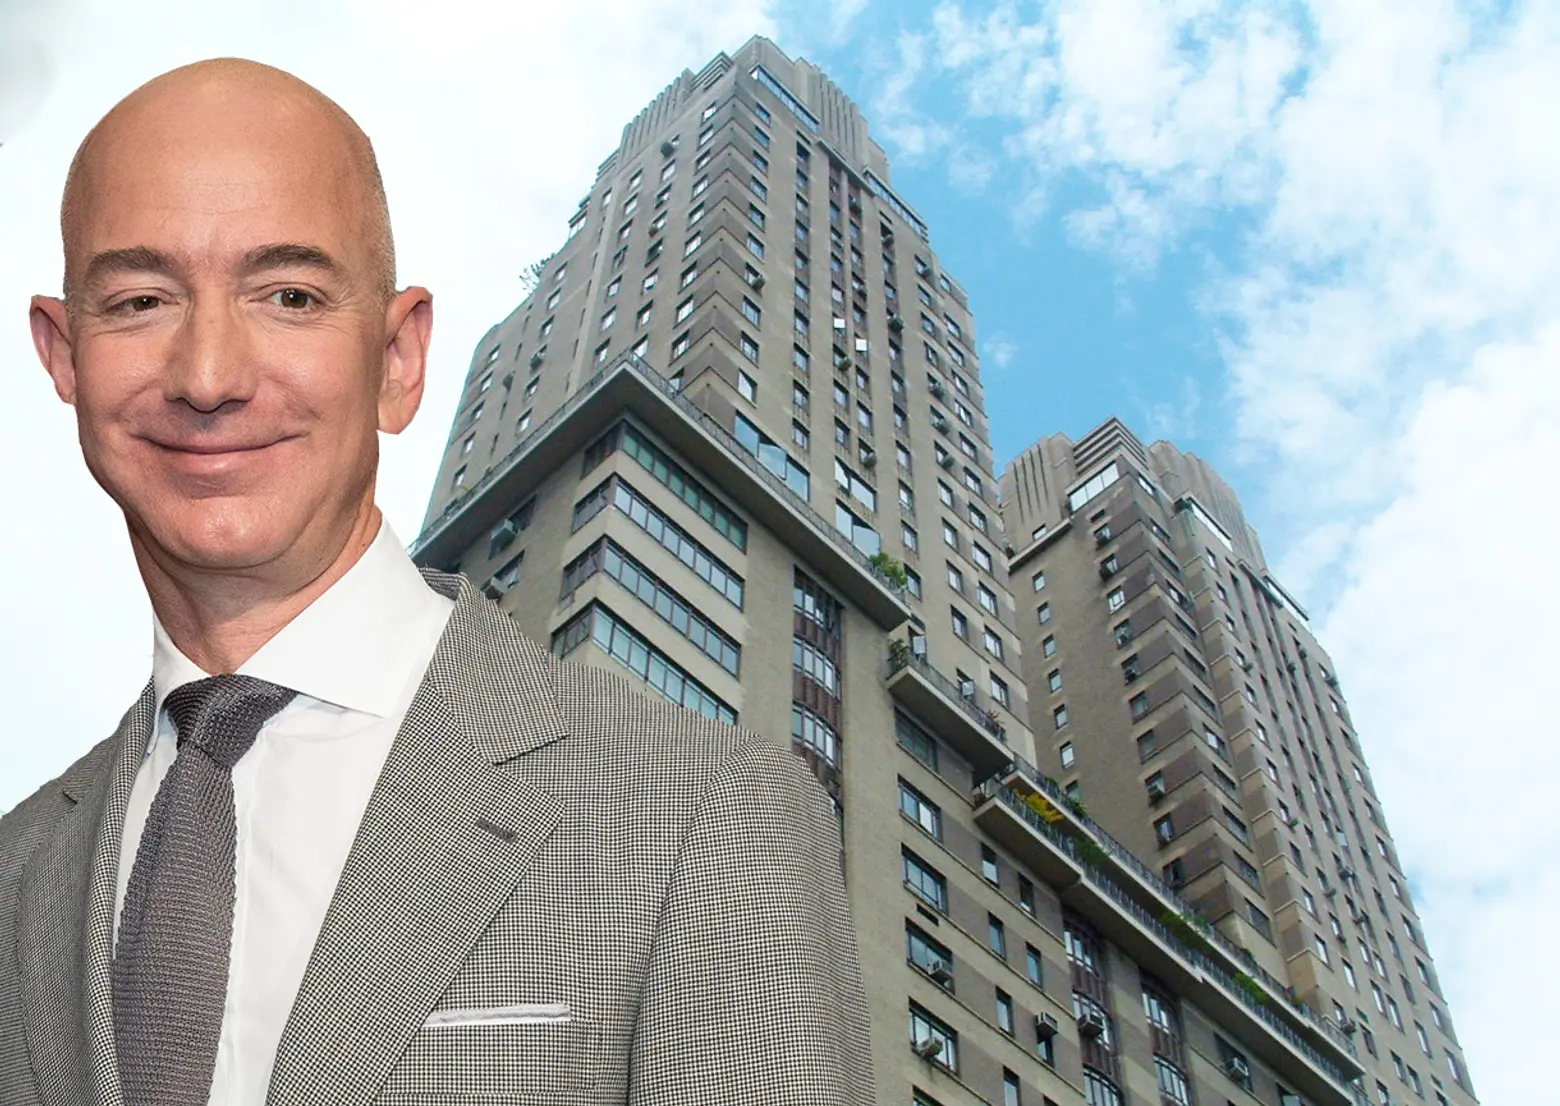 Will Jeff Bezos live in one of his Upper West Side apartments when Amazon comes to town?